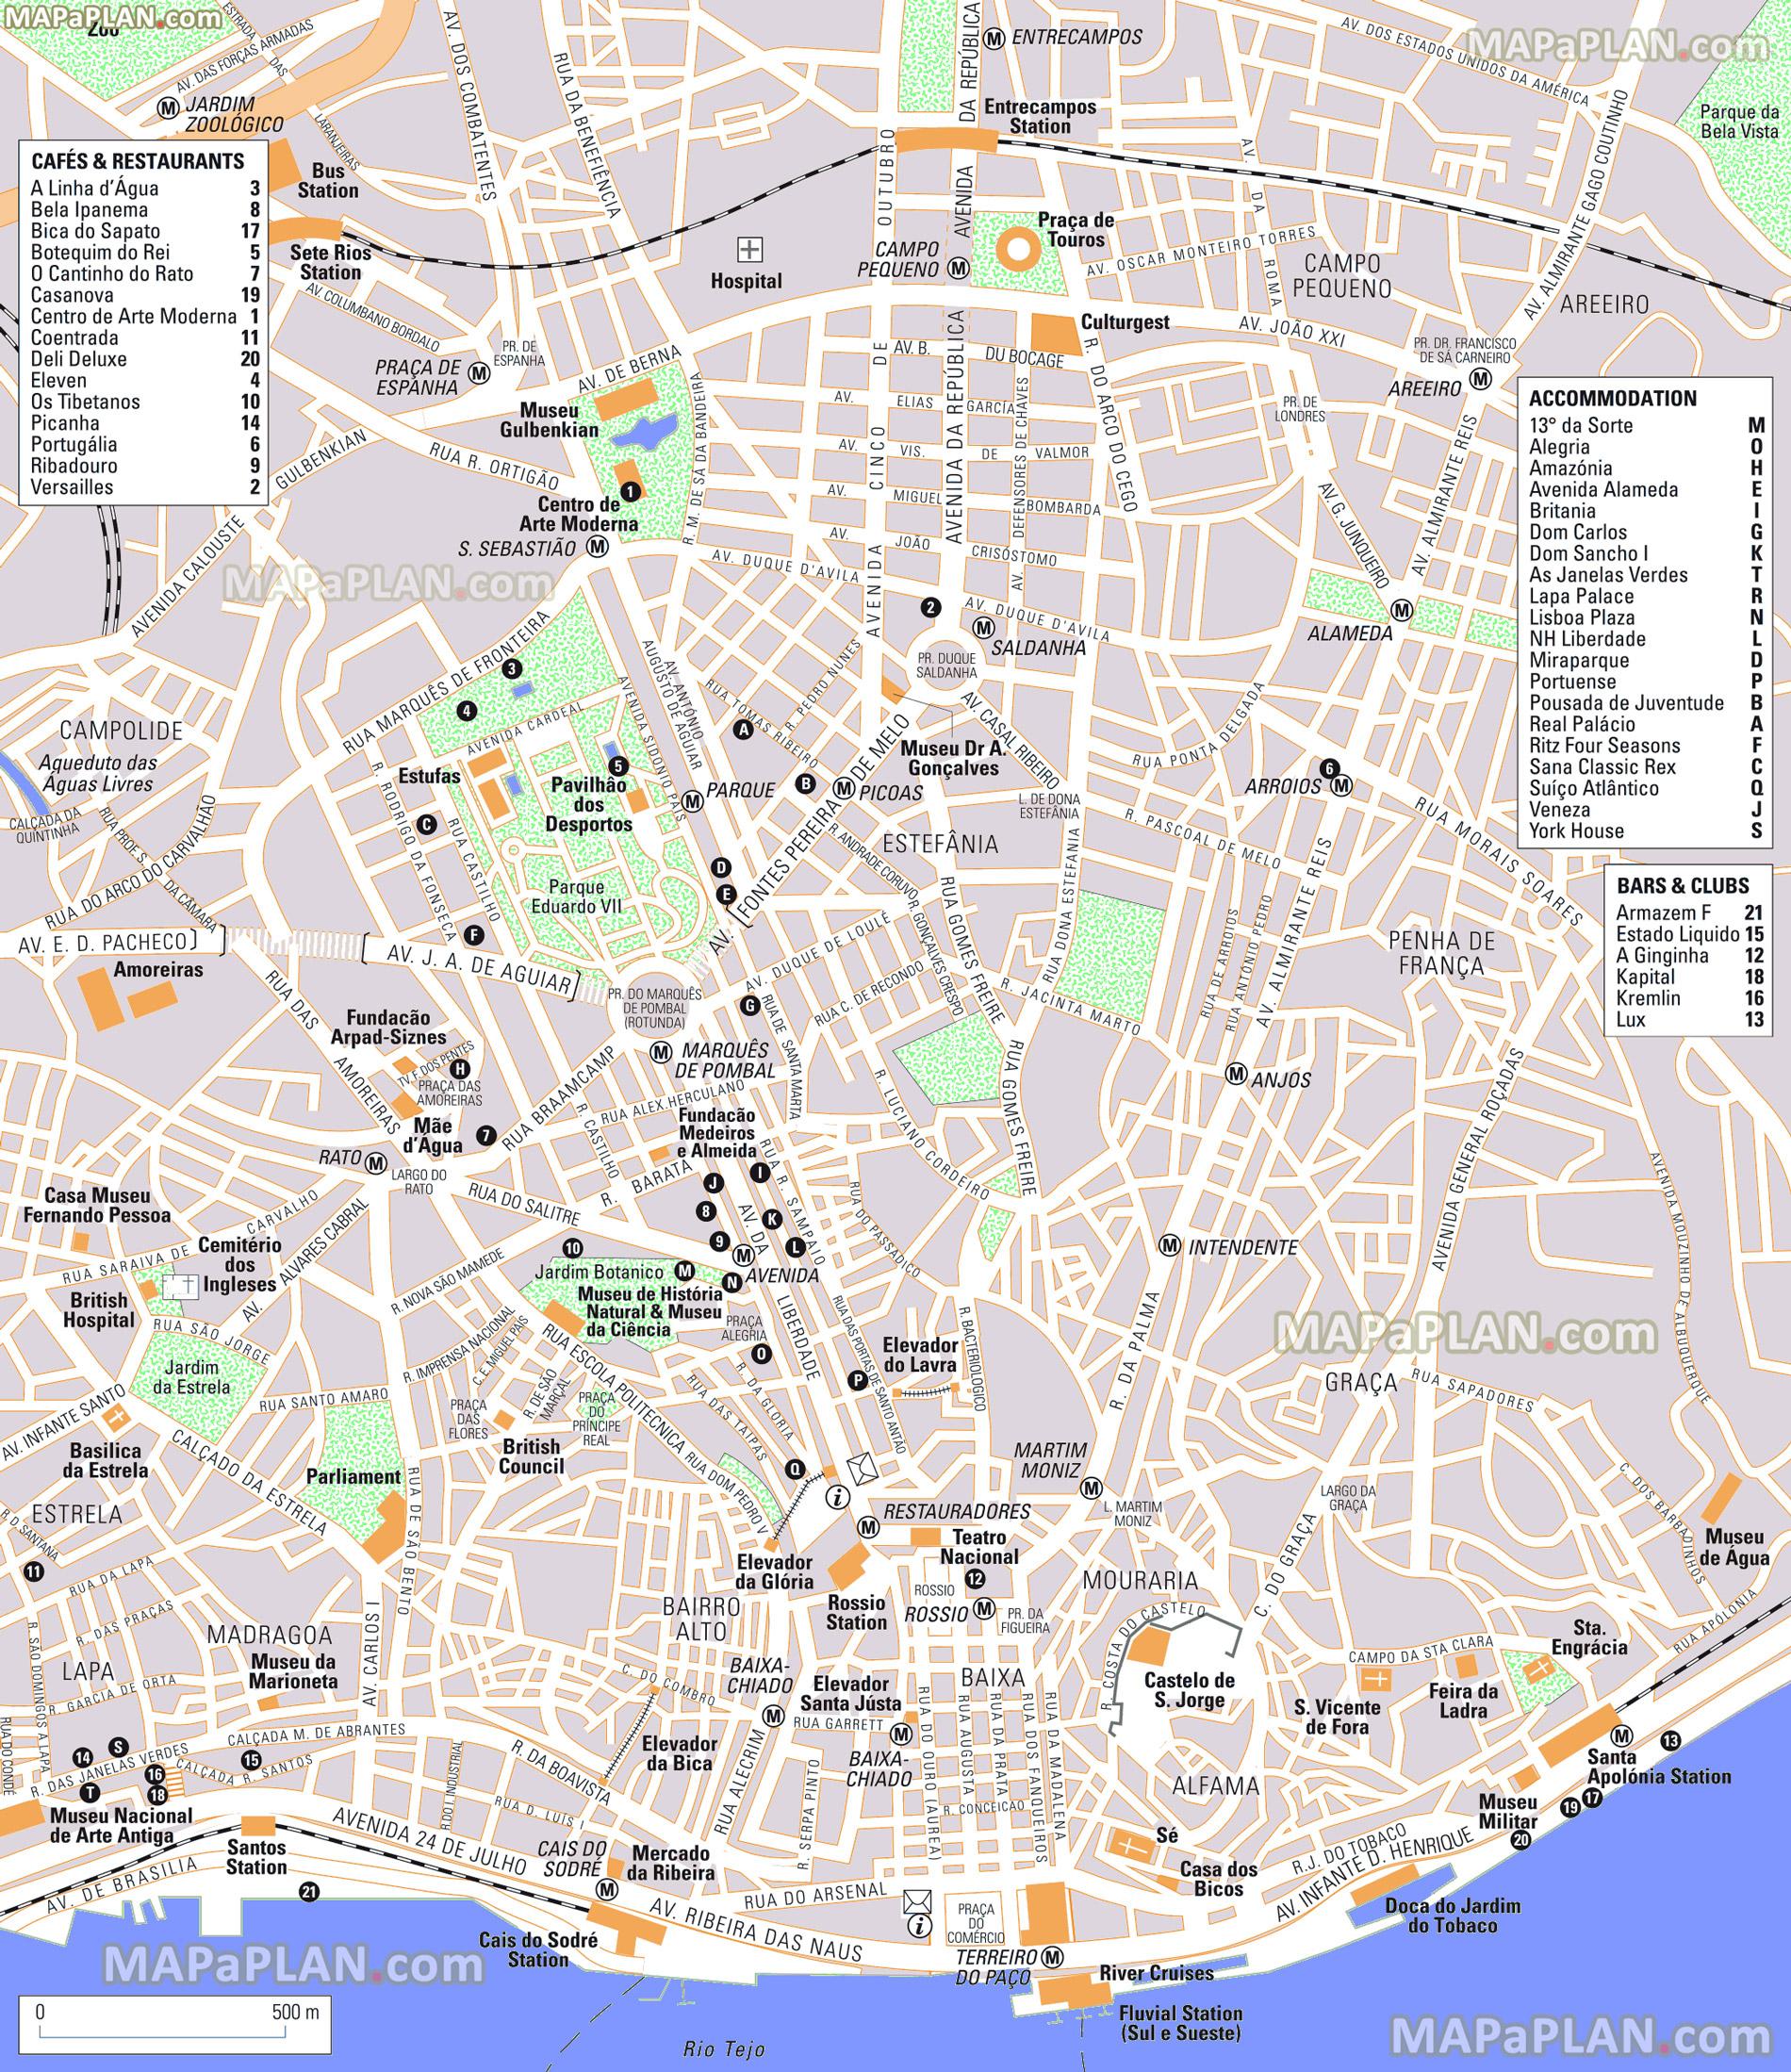 portugal tourist attractions map